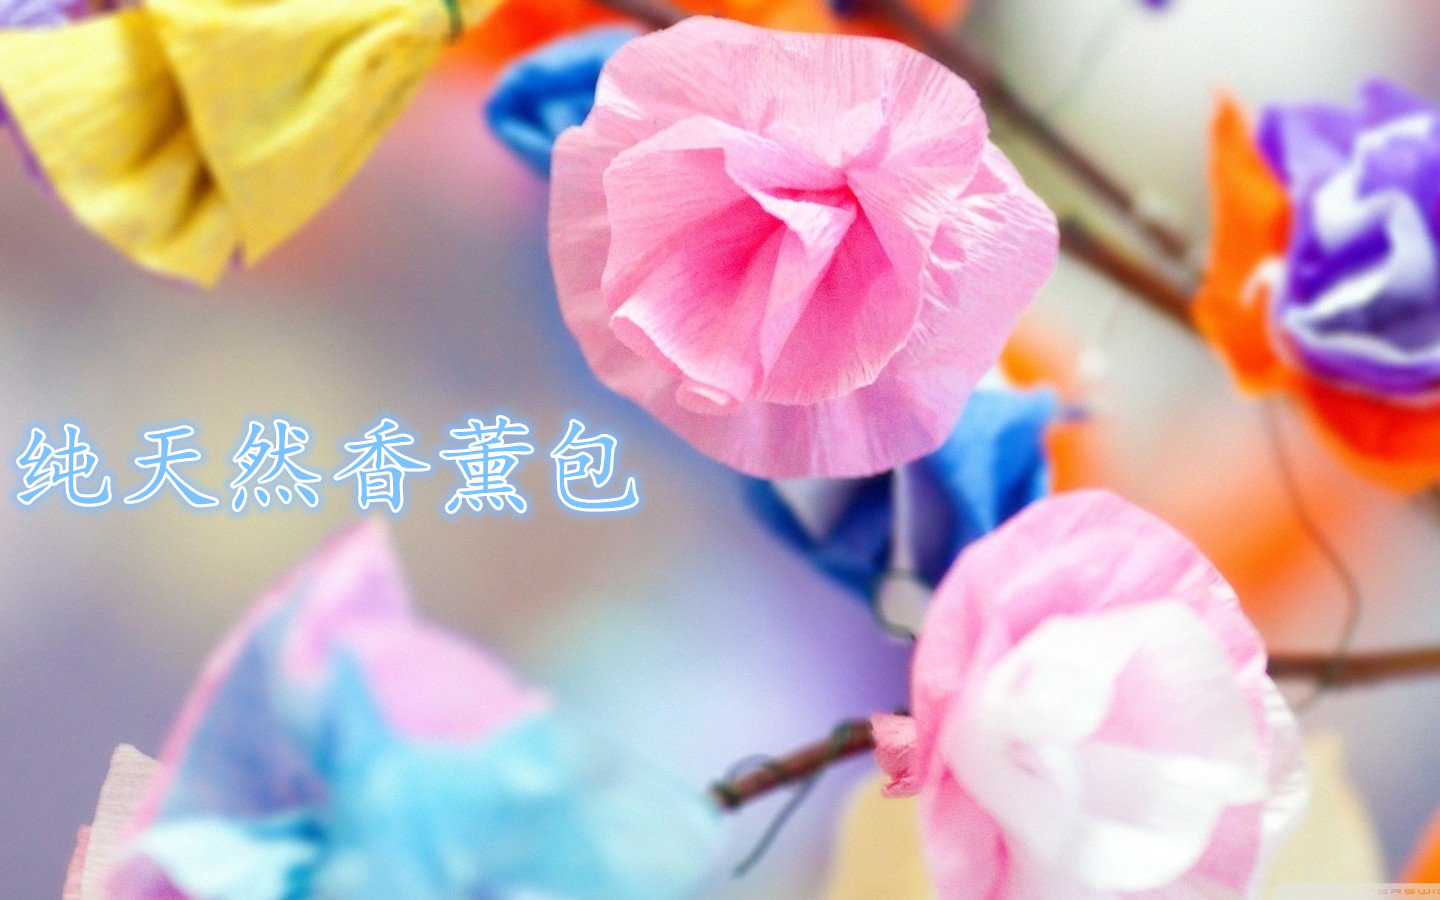 A family of aromatherapy manufacturers selling satin bow aromatherapy aromatherapy Fragrance Sachet bag bag: hyacinth violet Paris spring sky Caixia welcomed the crowd1